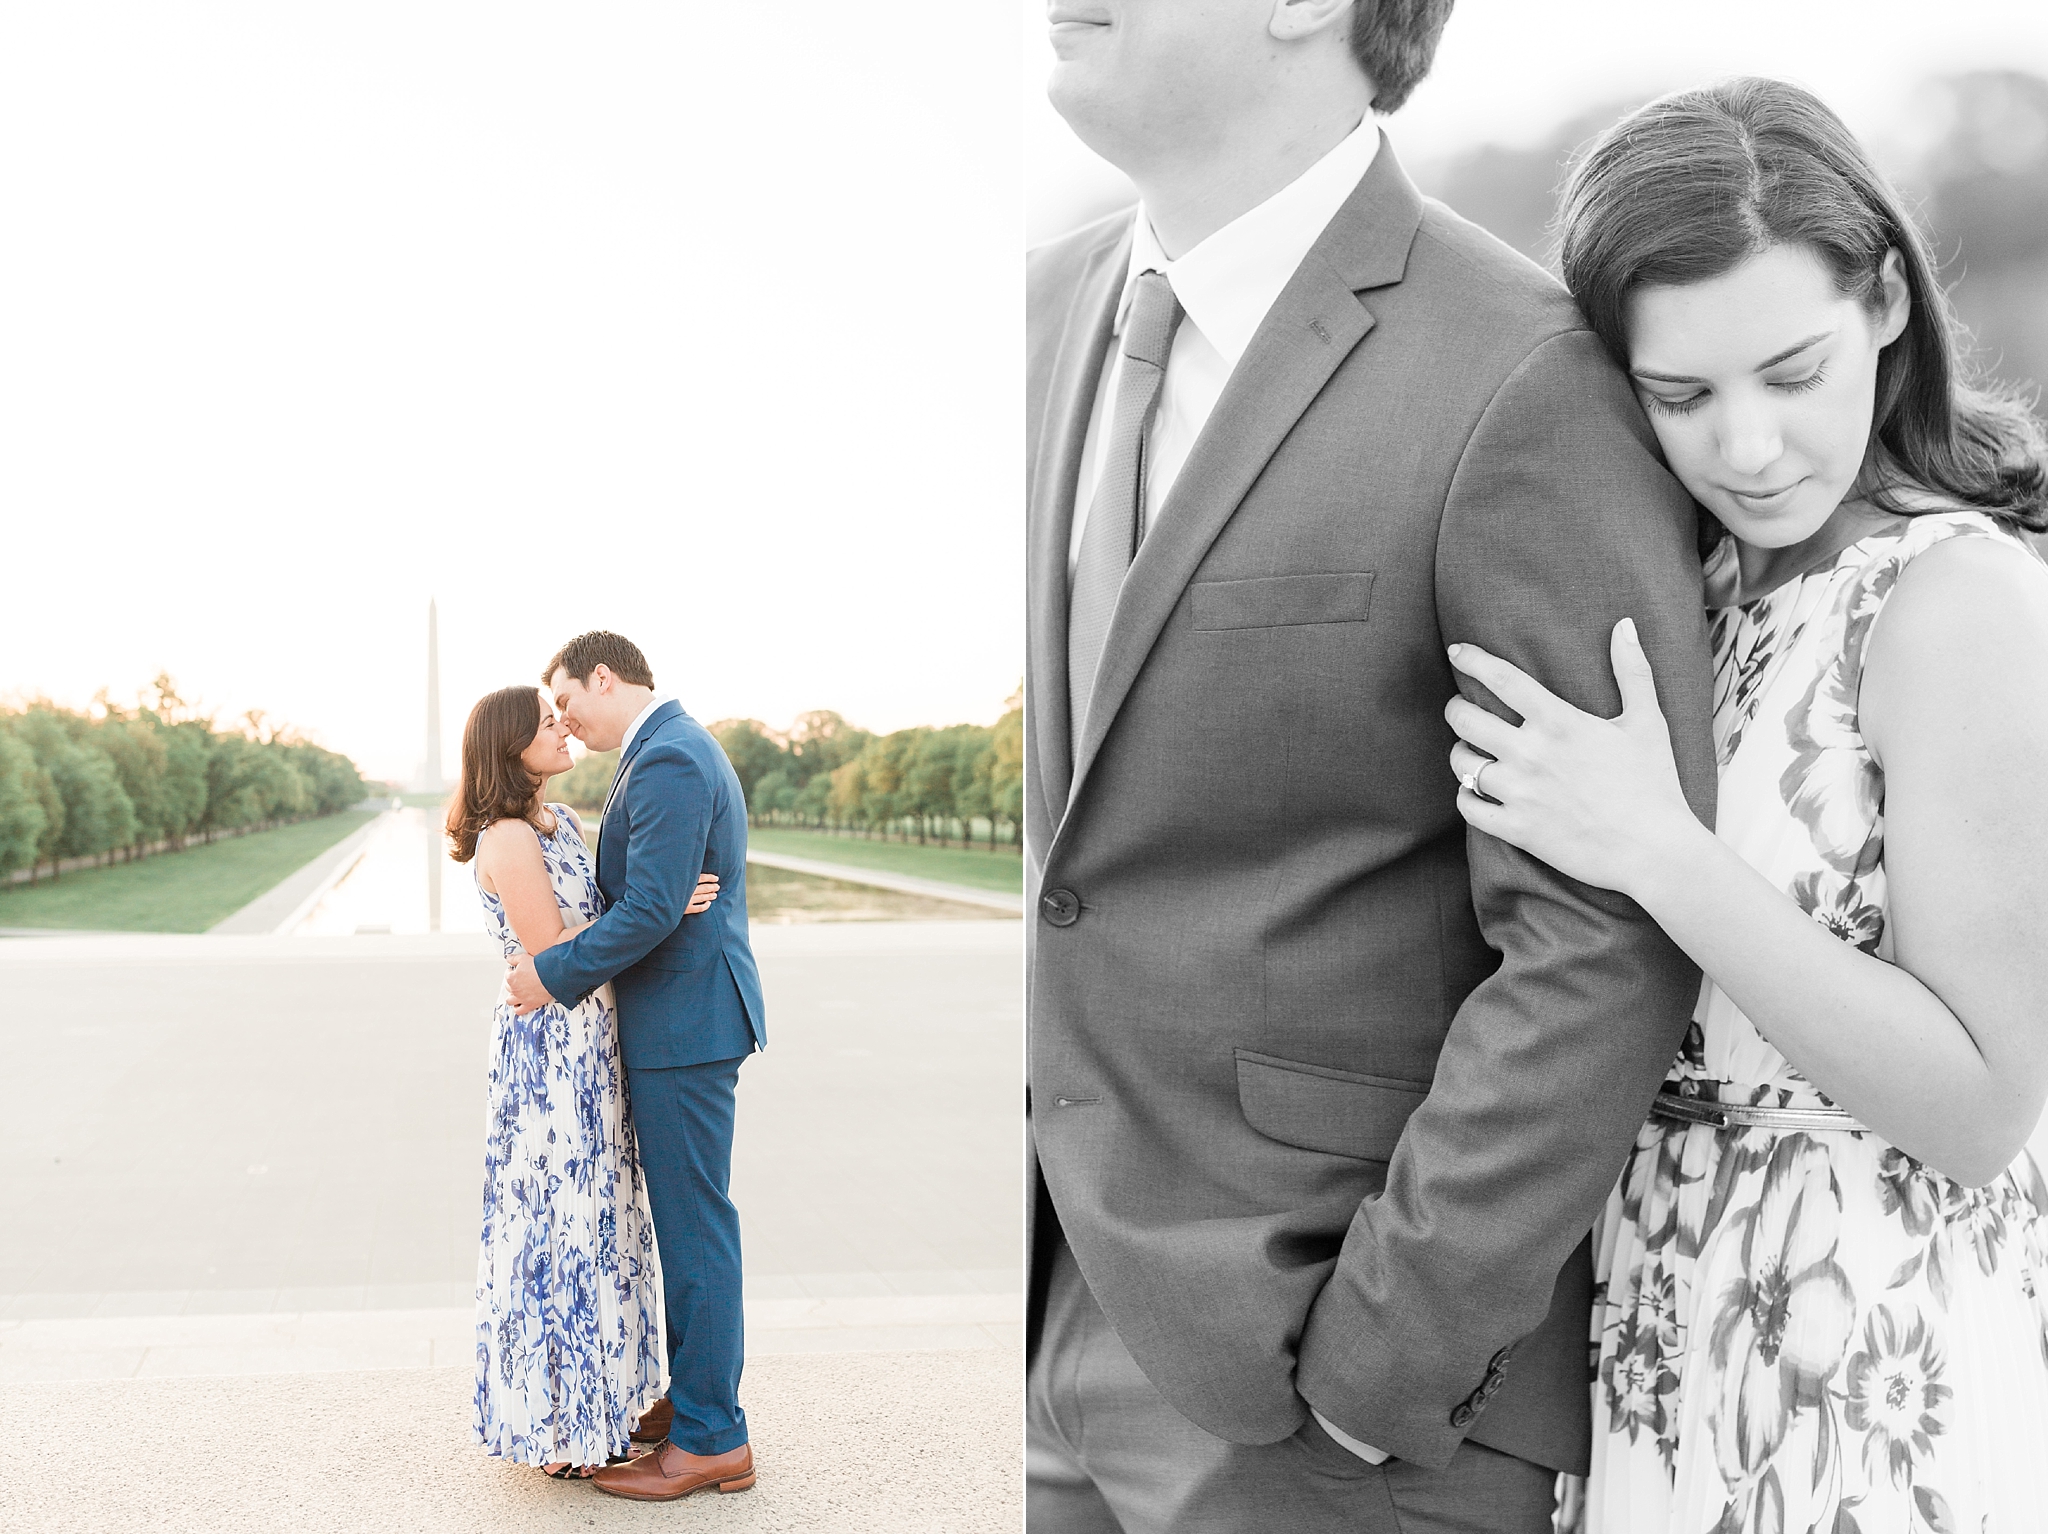 This romantic spring engagement session captures some of the most iconic highlights of Washington, DC including the Lincoln Memorial, Constitution Gardens, and DC War Memorial. 